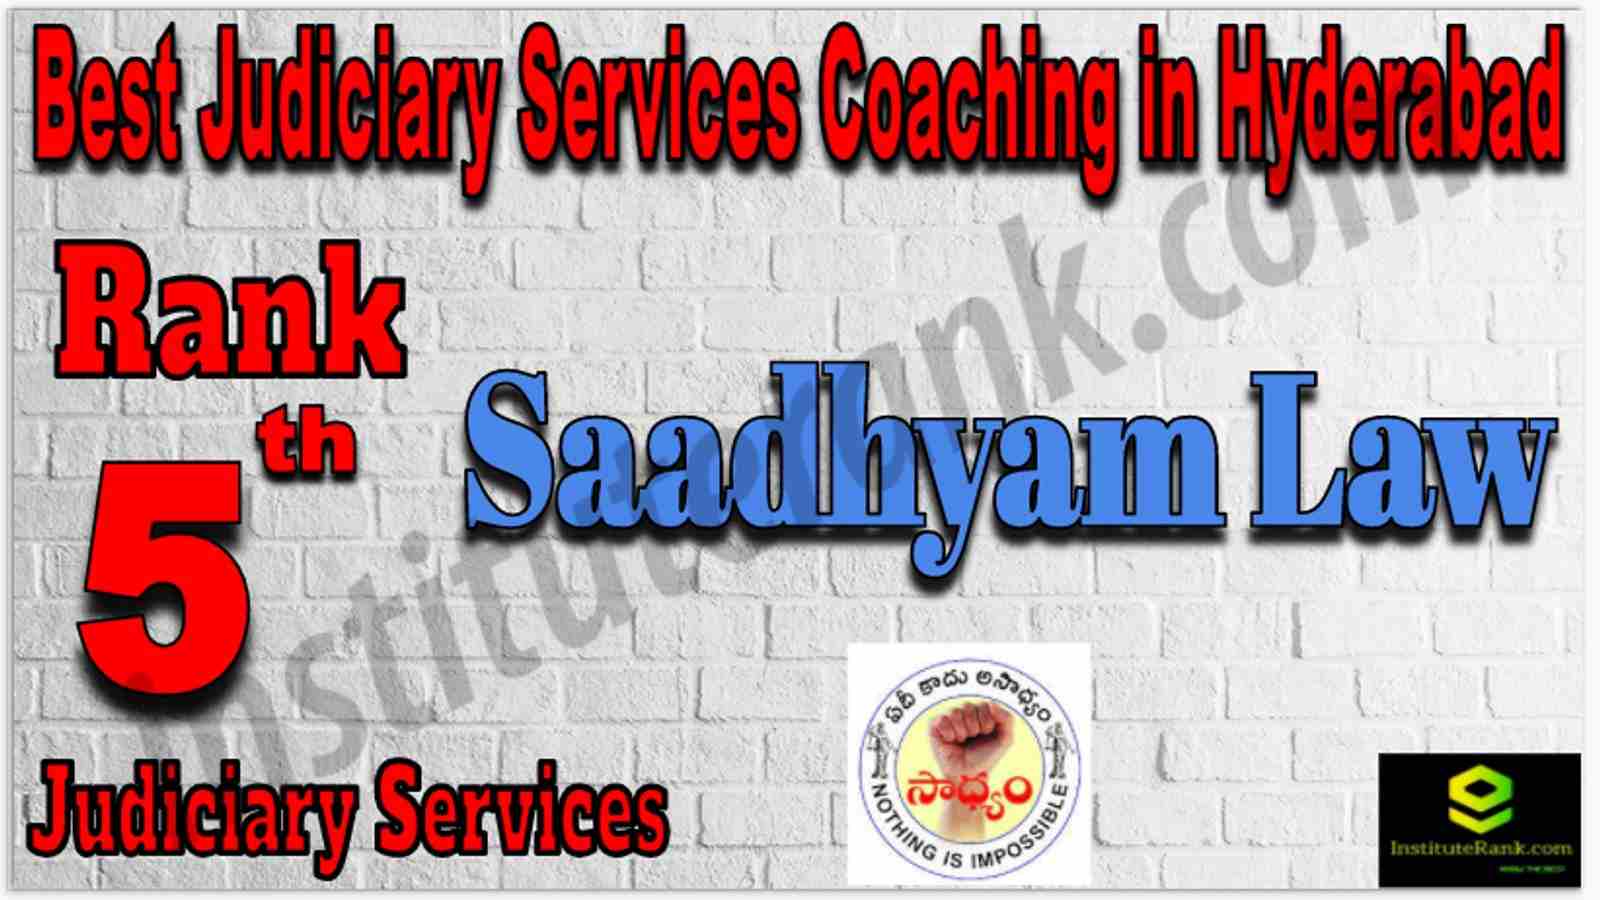 Rank 5 Best Judiciary Services Coaching in Hyderabad